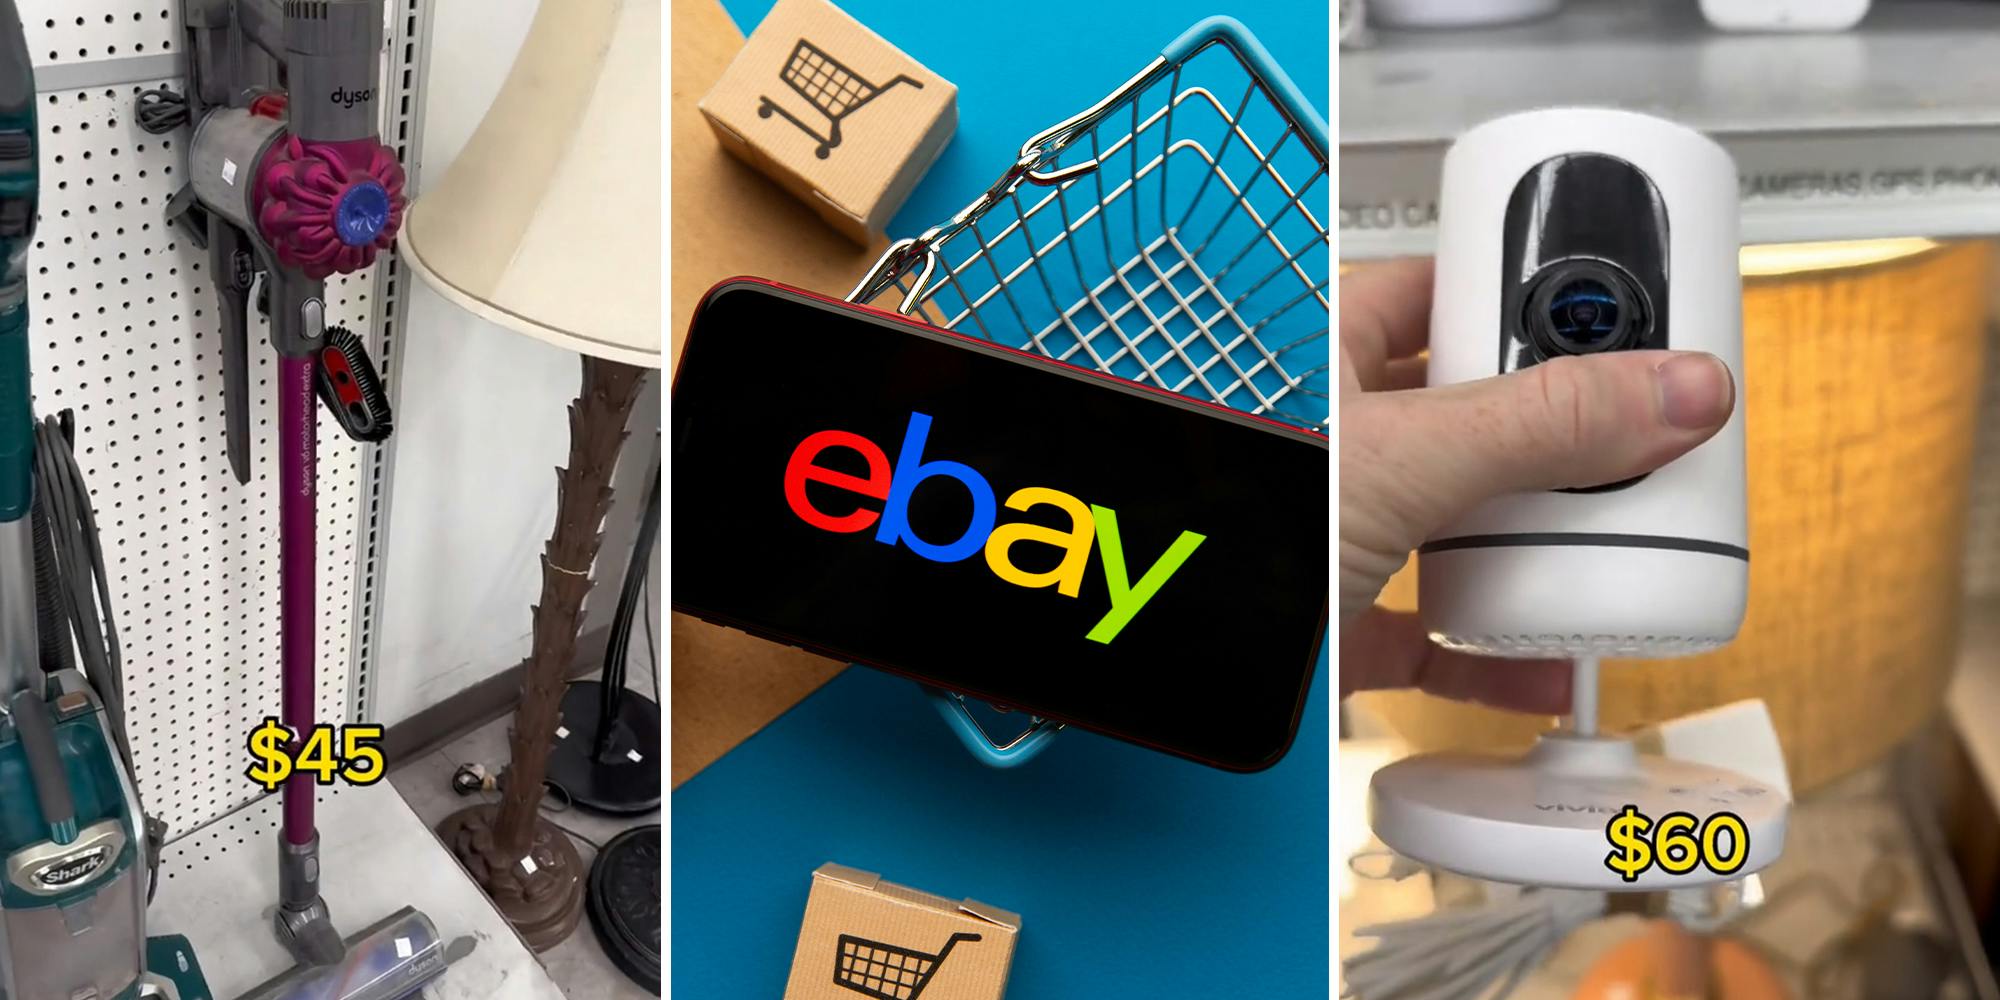 Man goes thrifting in ‘rich town,’ resells items on eBay for a profit